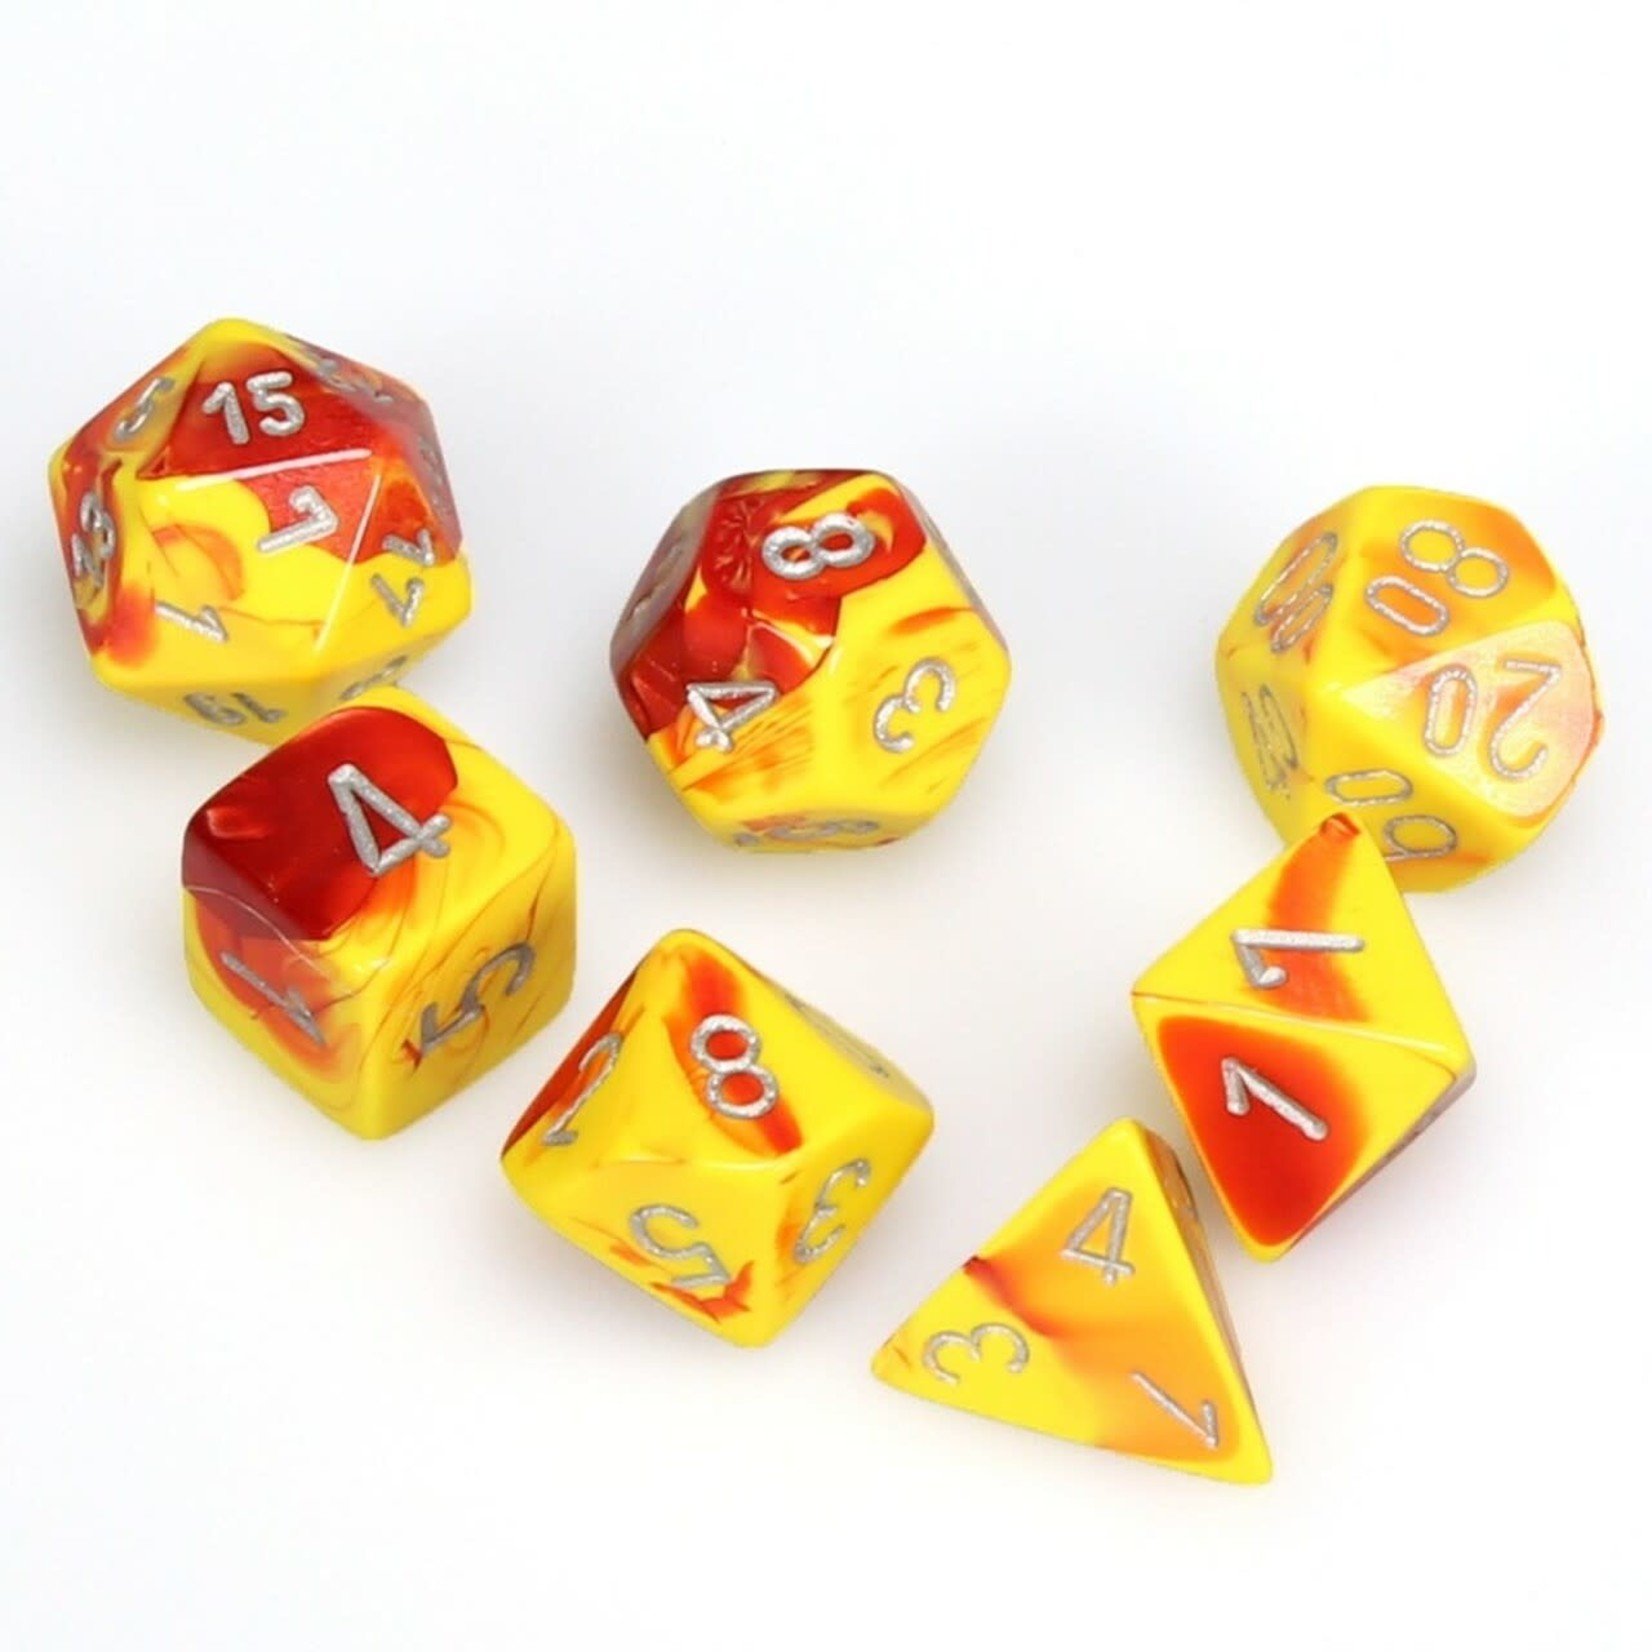 Chessex Chessex Gemini Red / Yellow with Silver Polyhedral 7 die set